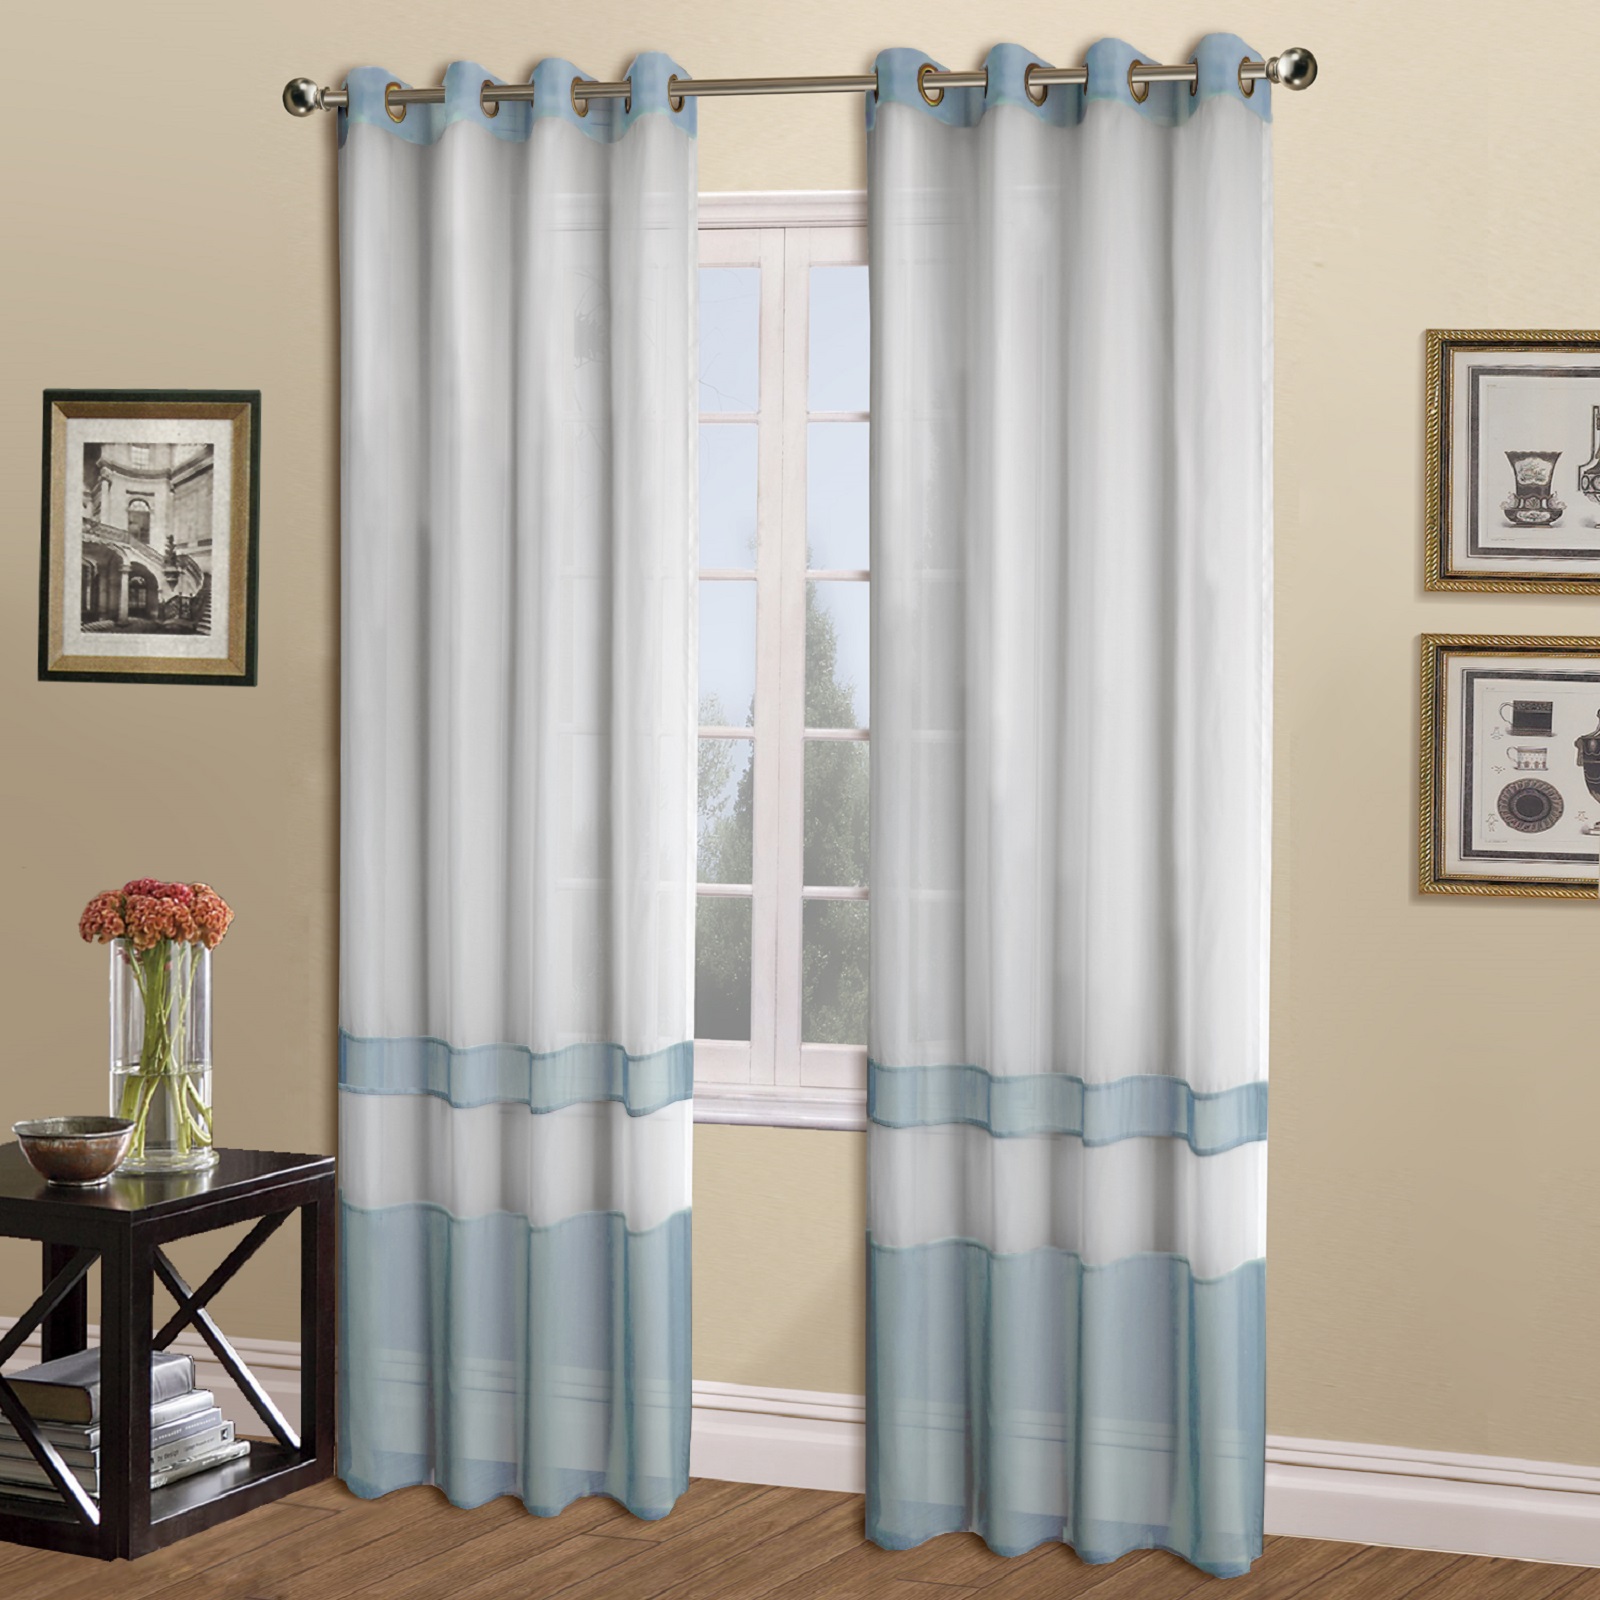 United Curtain Company Milan 54" x 84" voile panel available in sage, blue, chocolate, black and burgundy